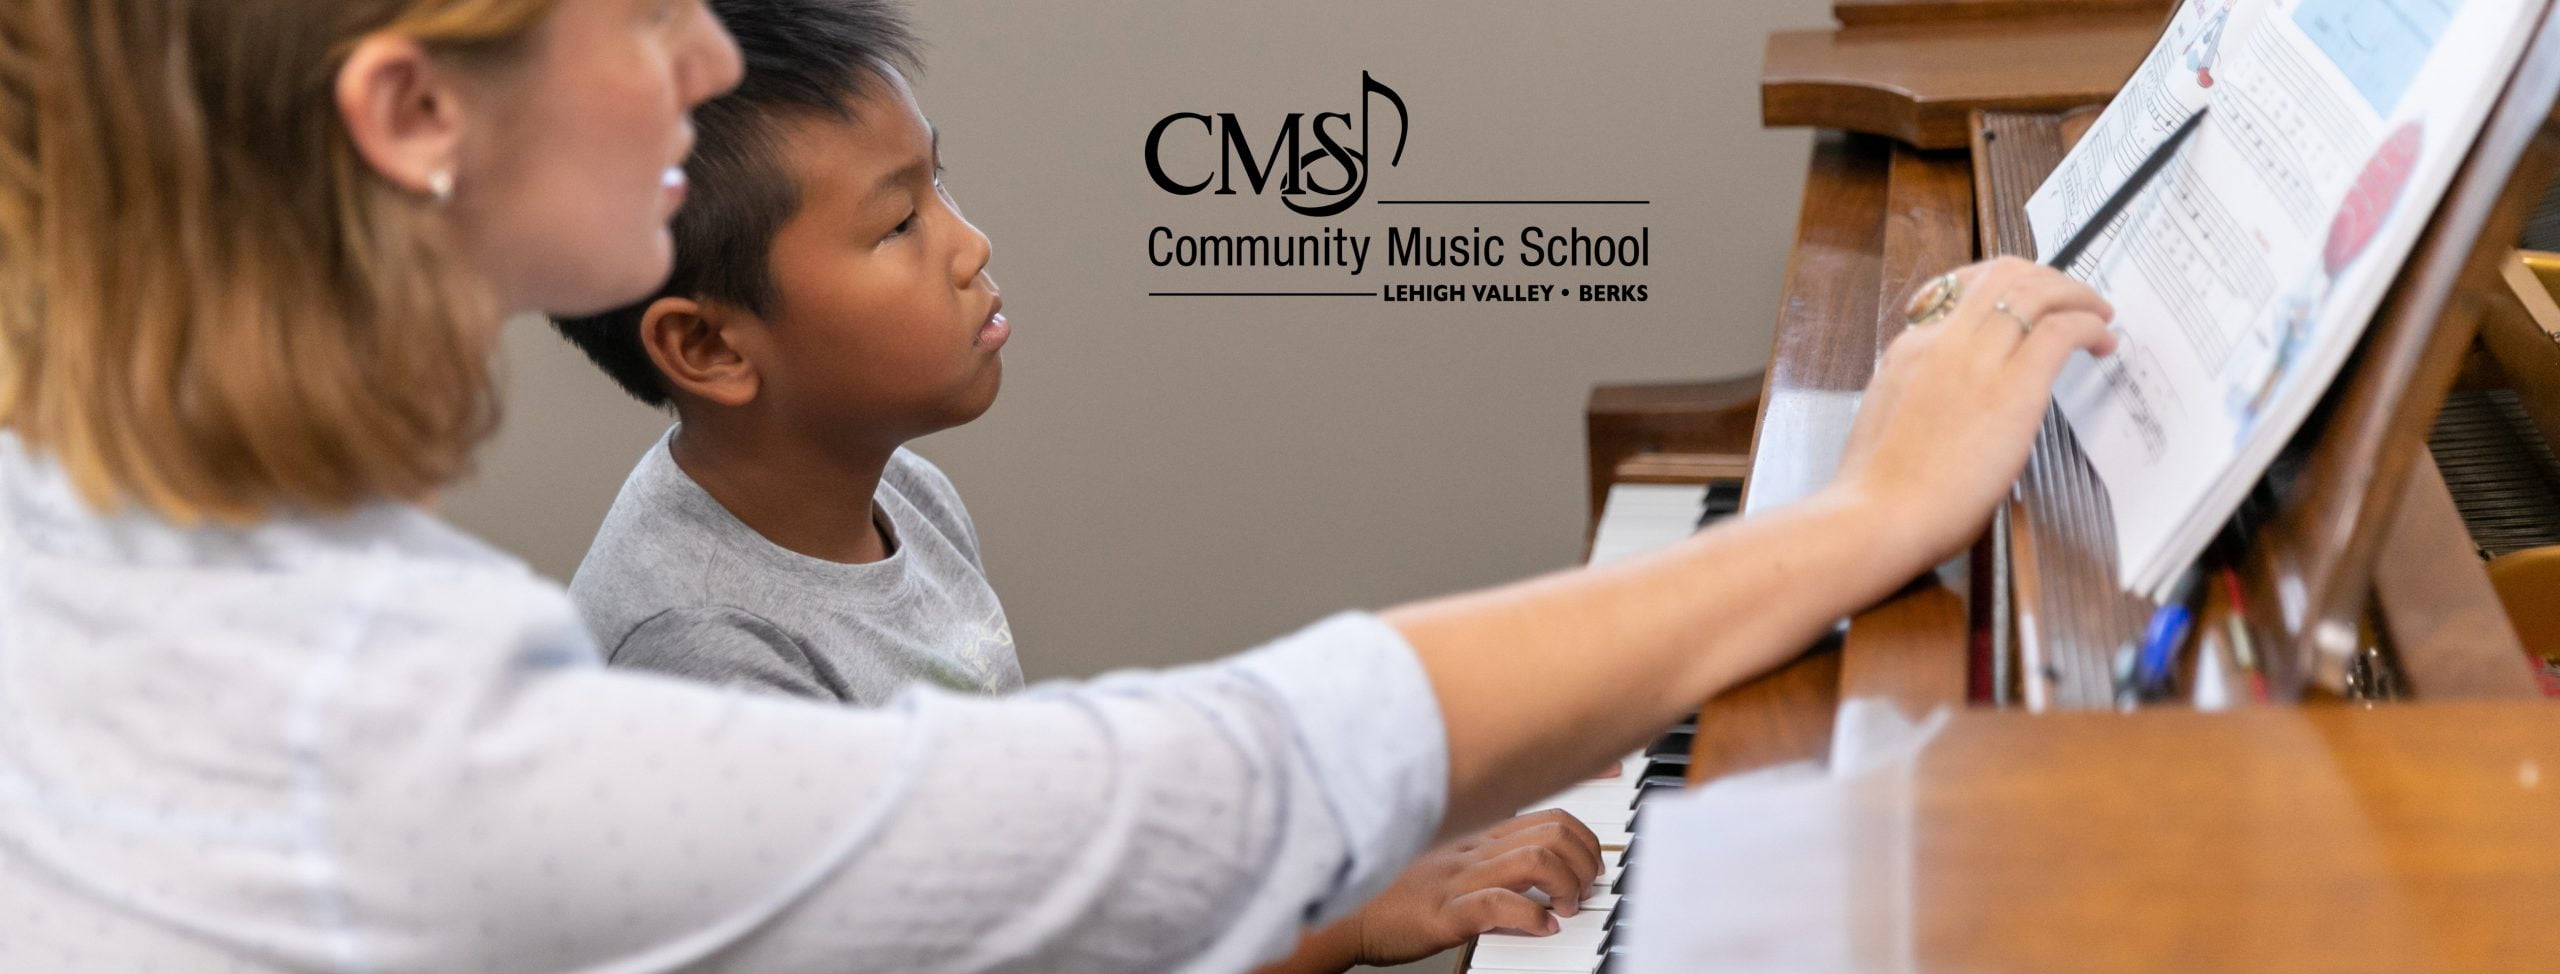 Kelly Hooper, piano teacher gives a piano lesson to a young student at Community Music School.